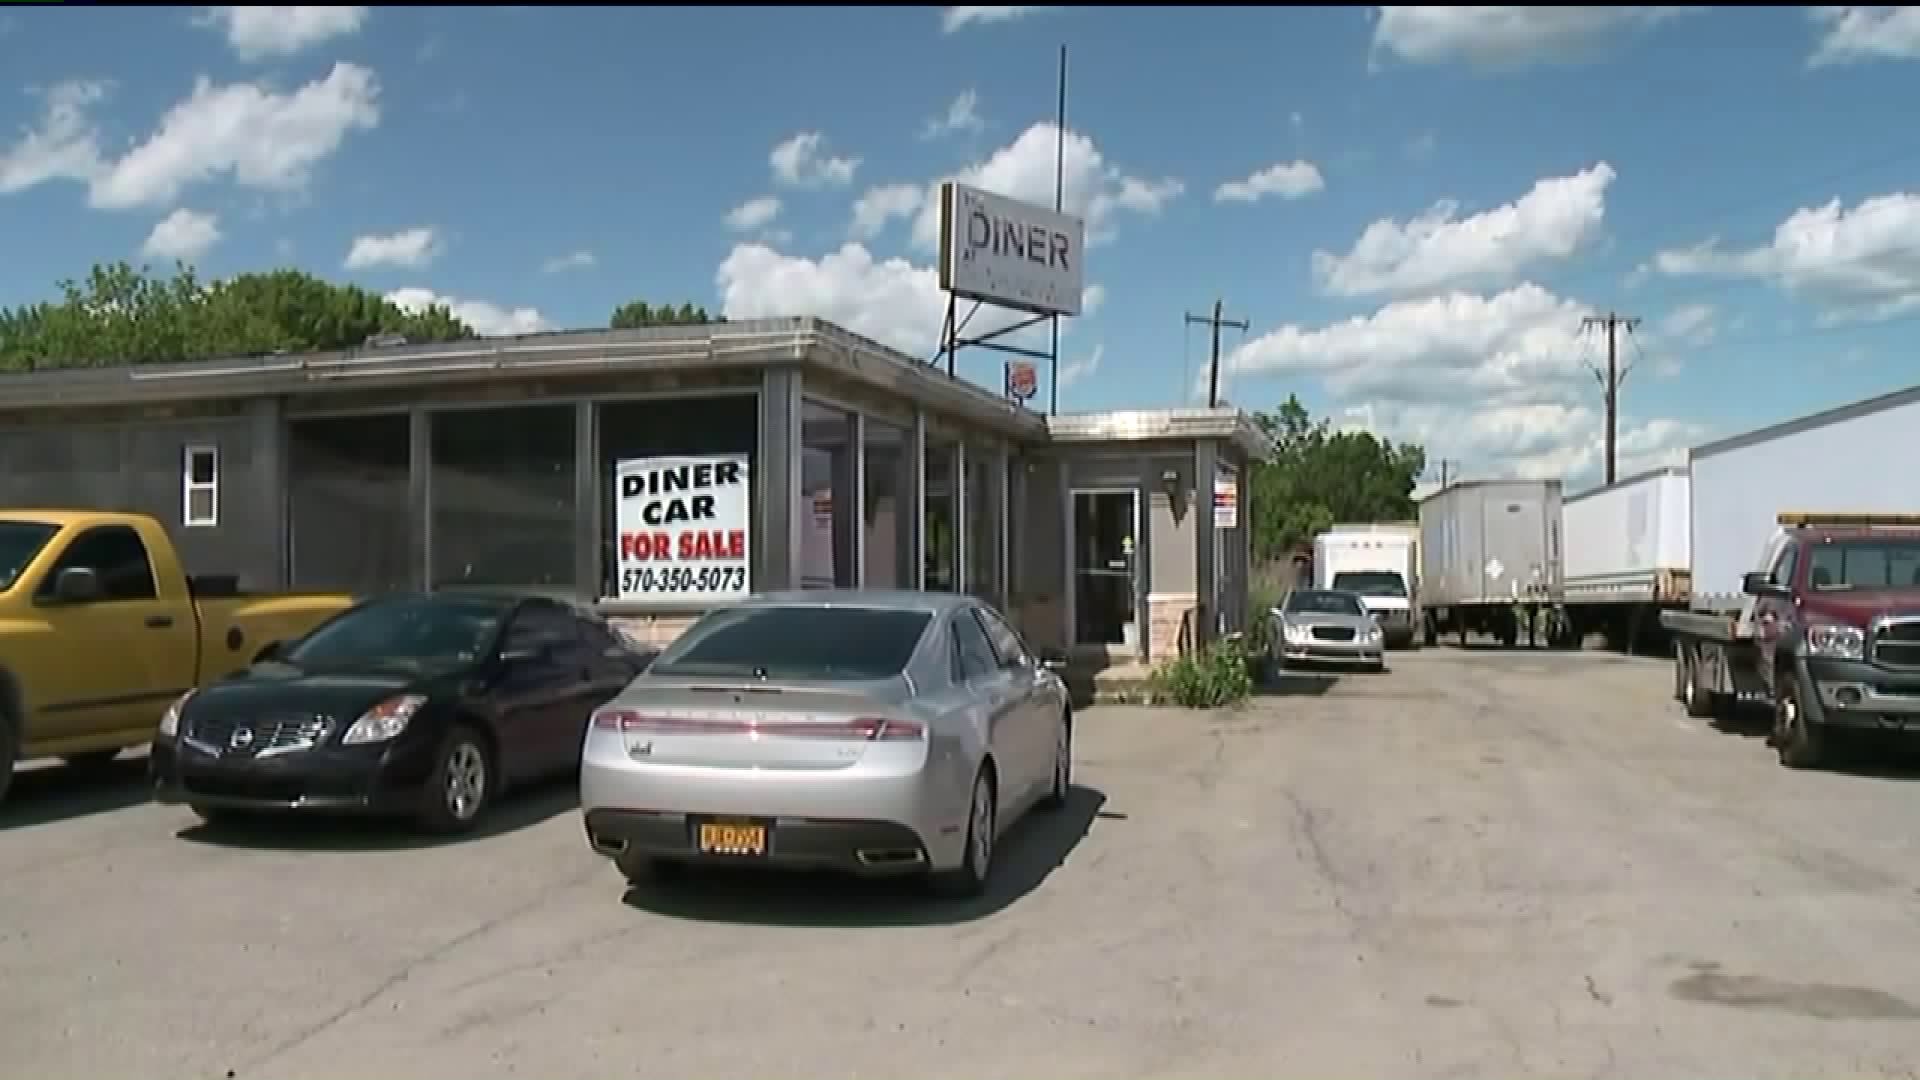 Tannersville Diner Auction Set for the Weekend